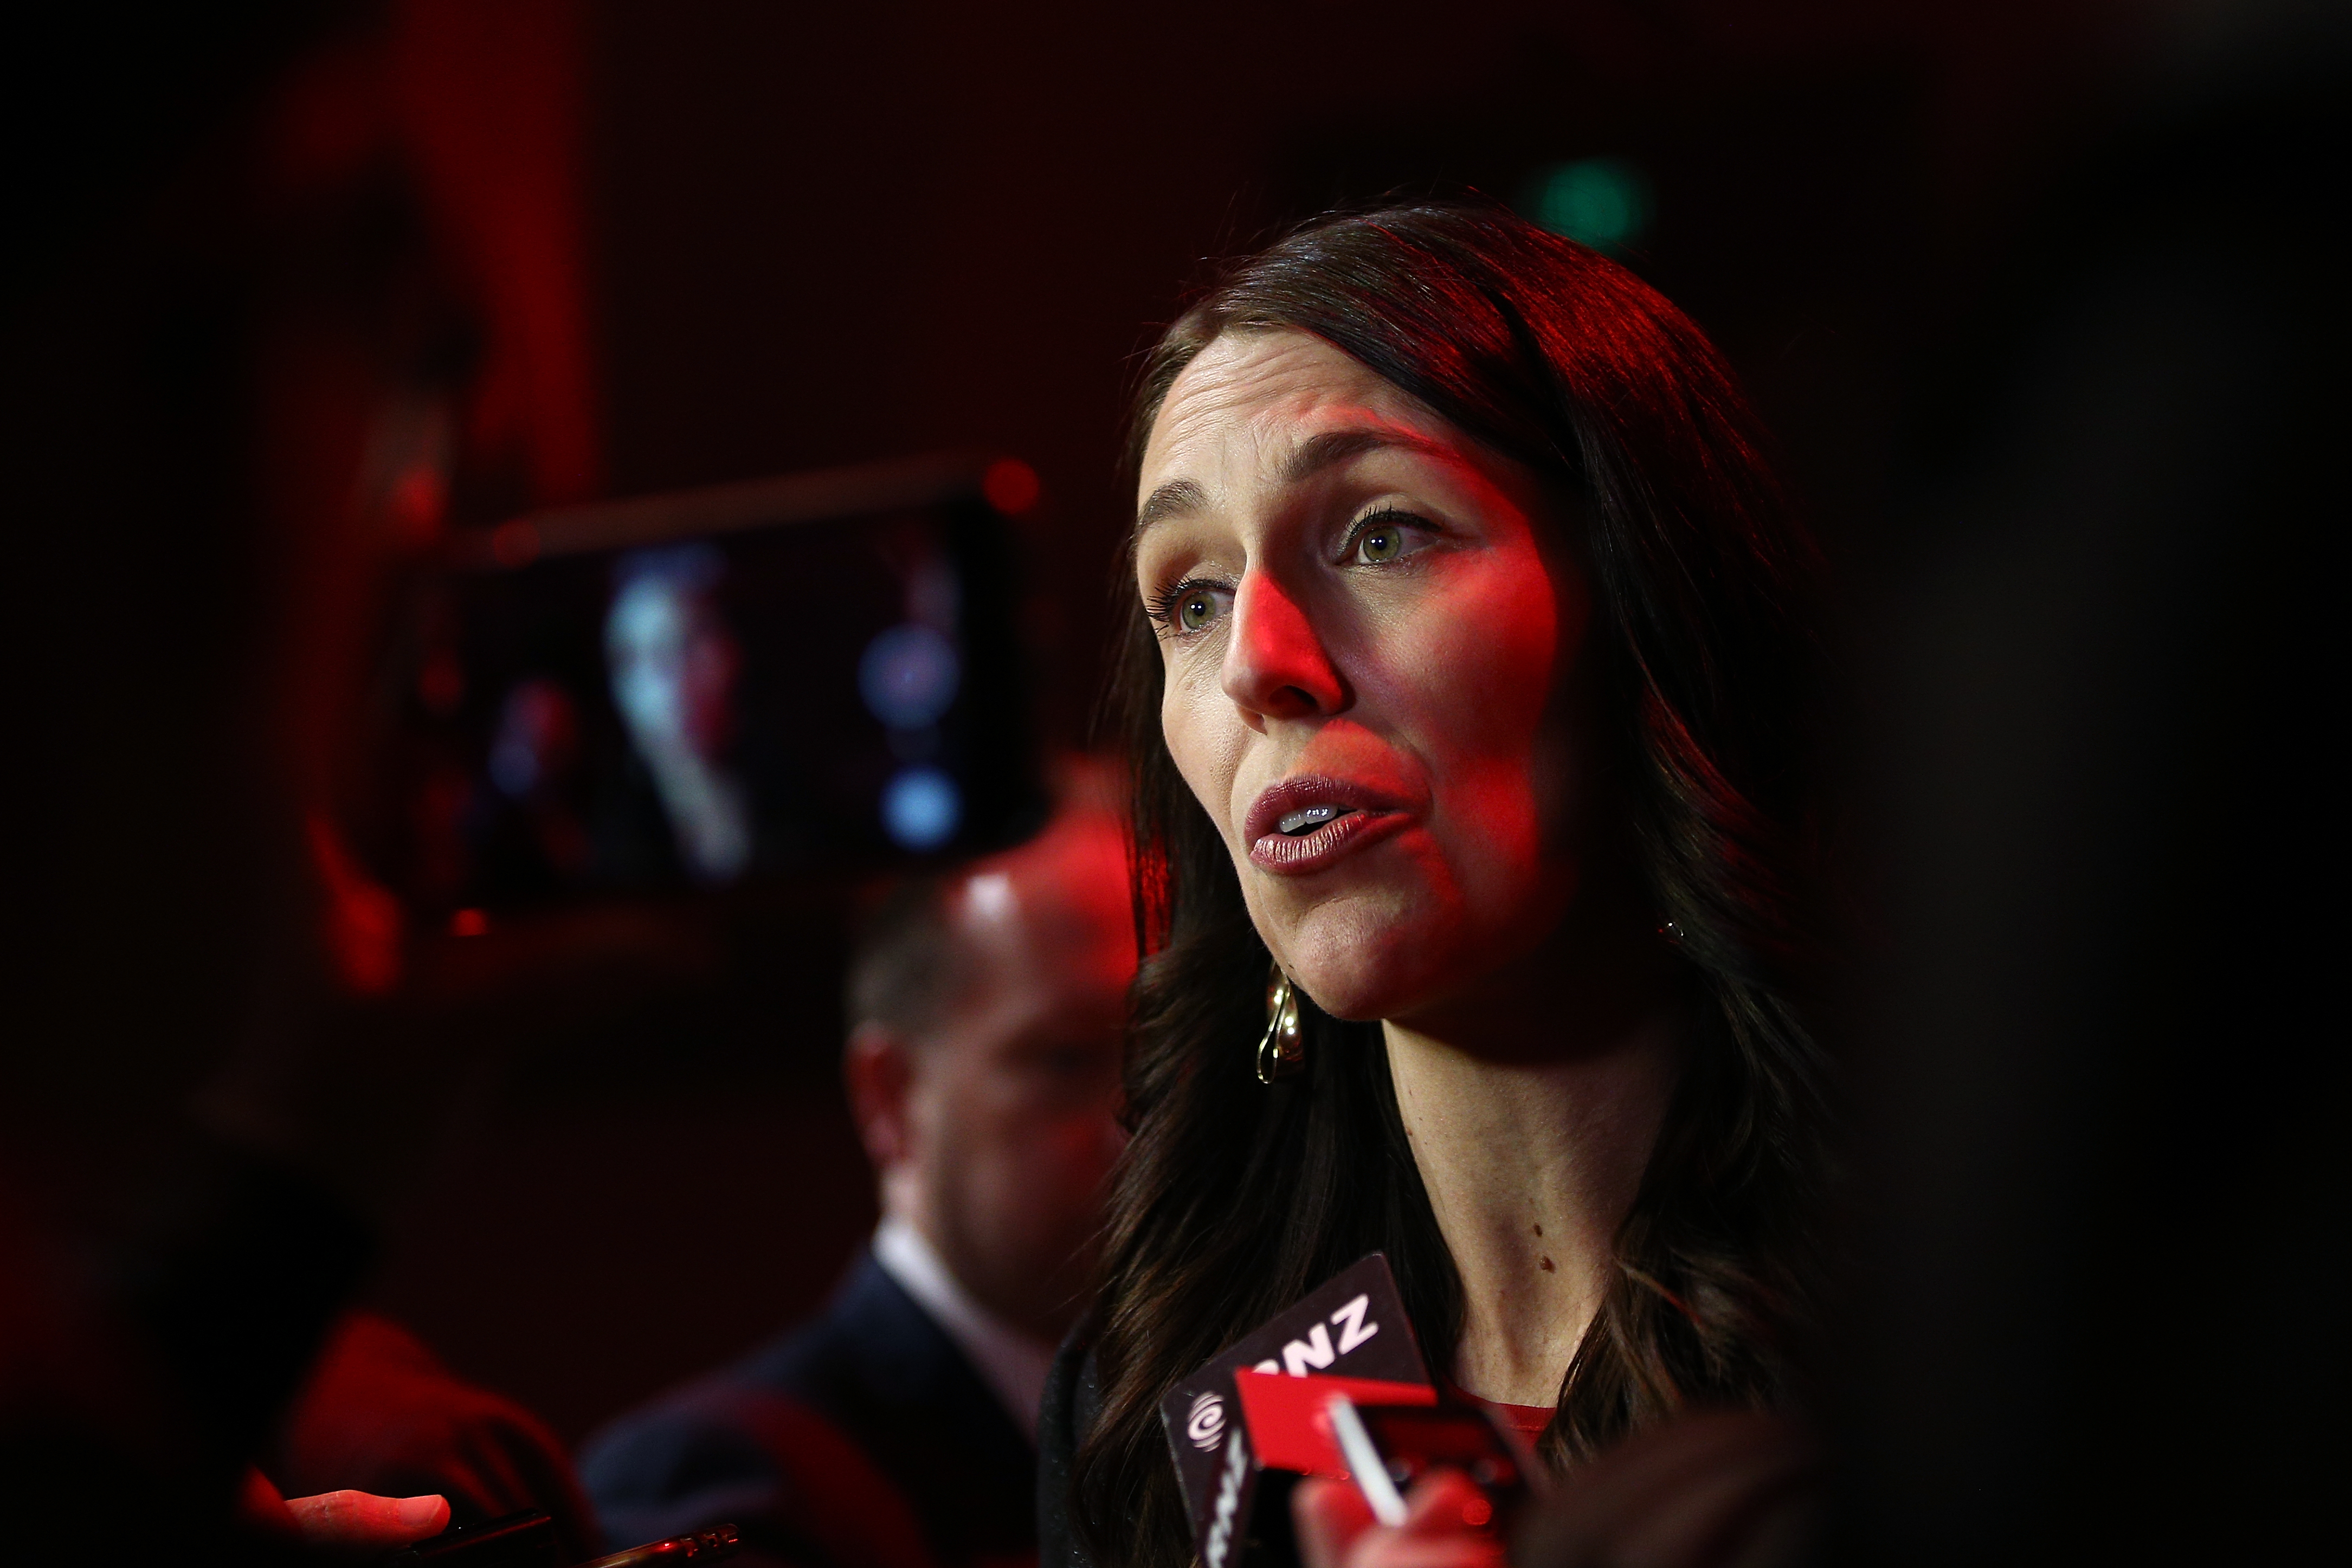 Prime Minister Jacinda Ardern speaks with media after the Labour Party Conference on November 4, 2018 in Dunedin, New Zealand. (Dianne Manson&mdash;Getty Images)